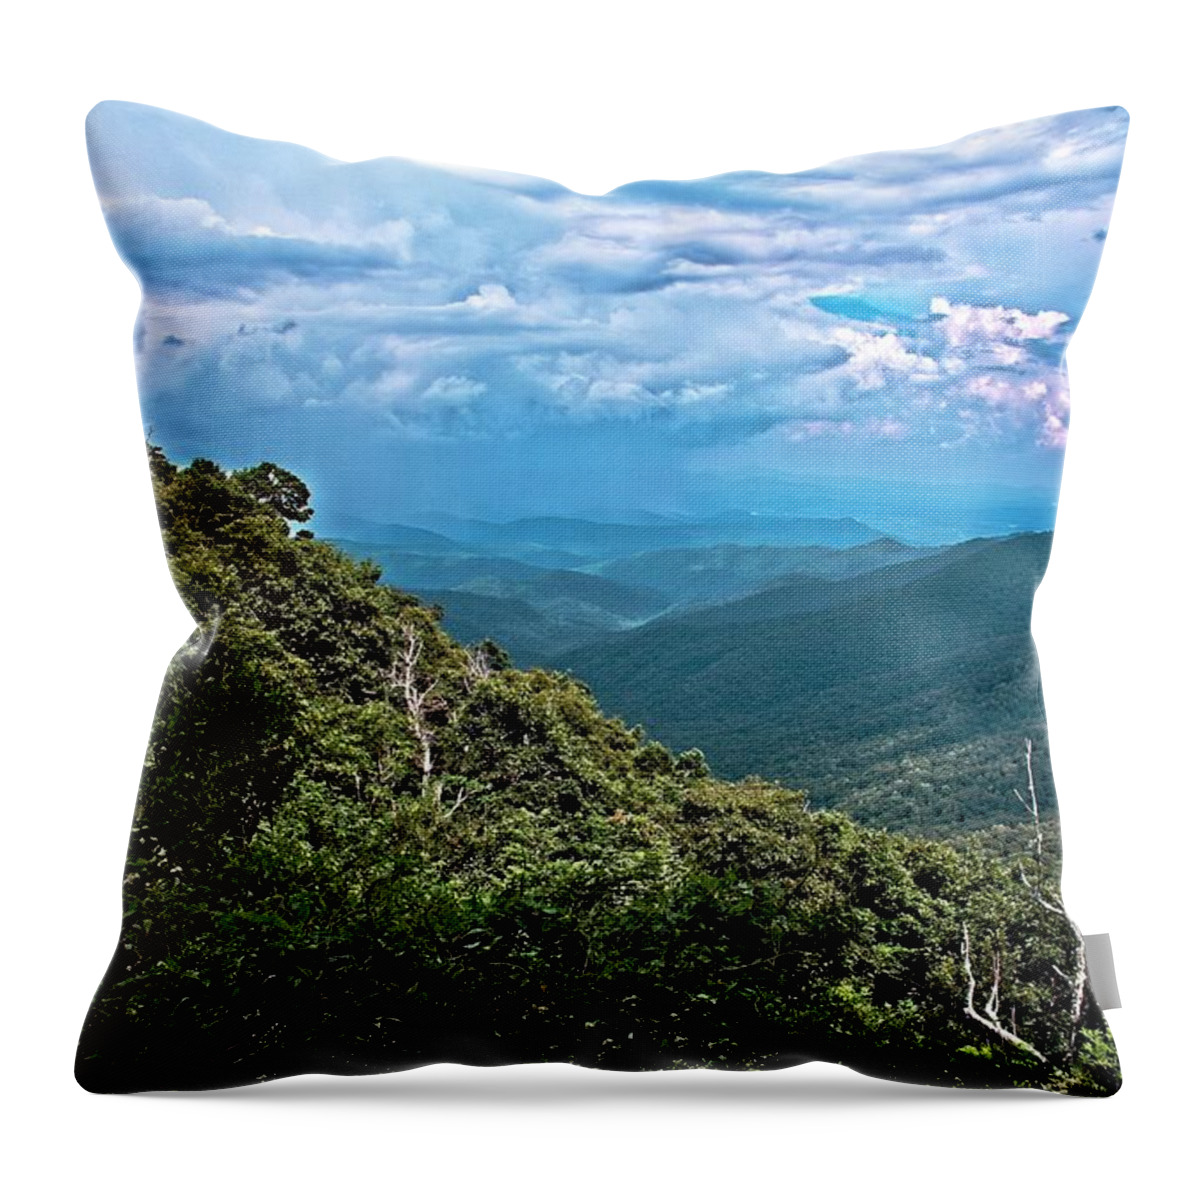 Mountains Throw Pillow featuring the photograph Mountain Skies by Allen Nice-Webb